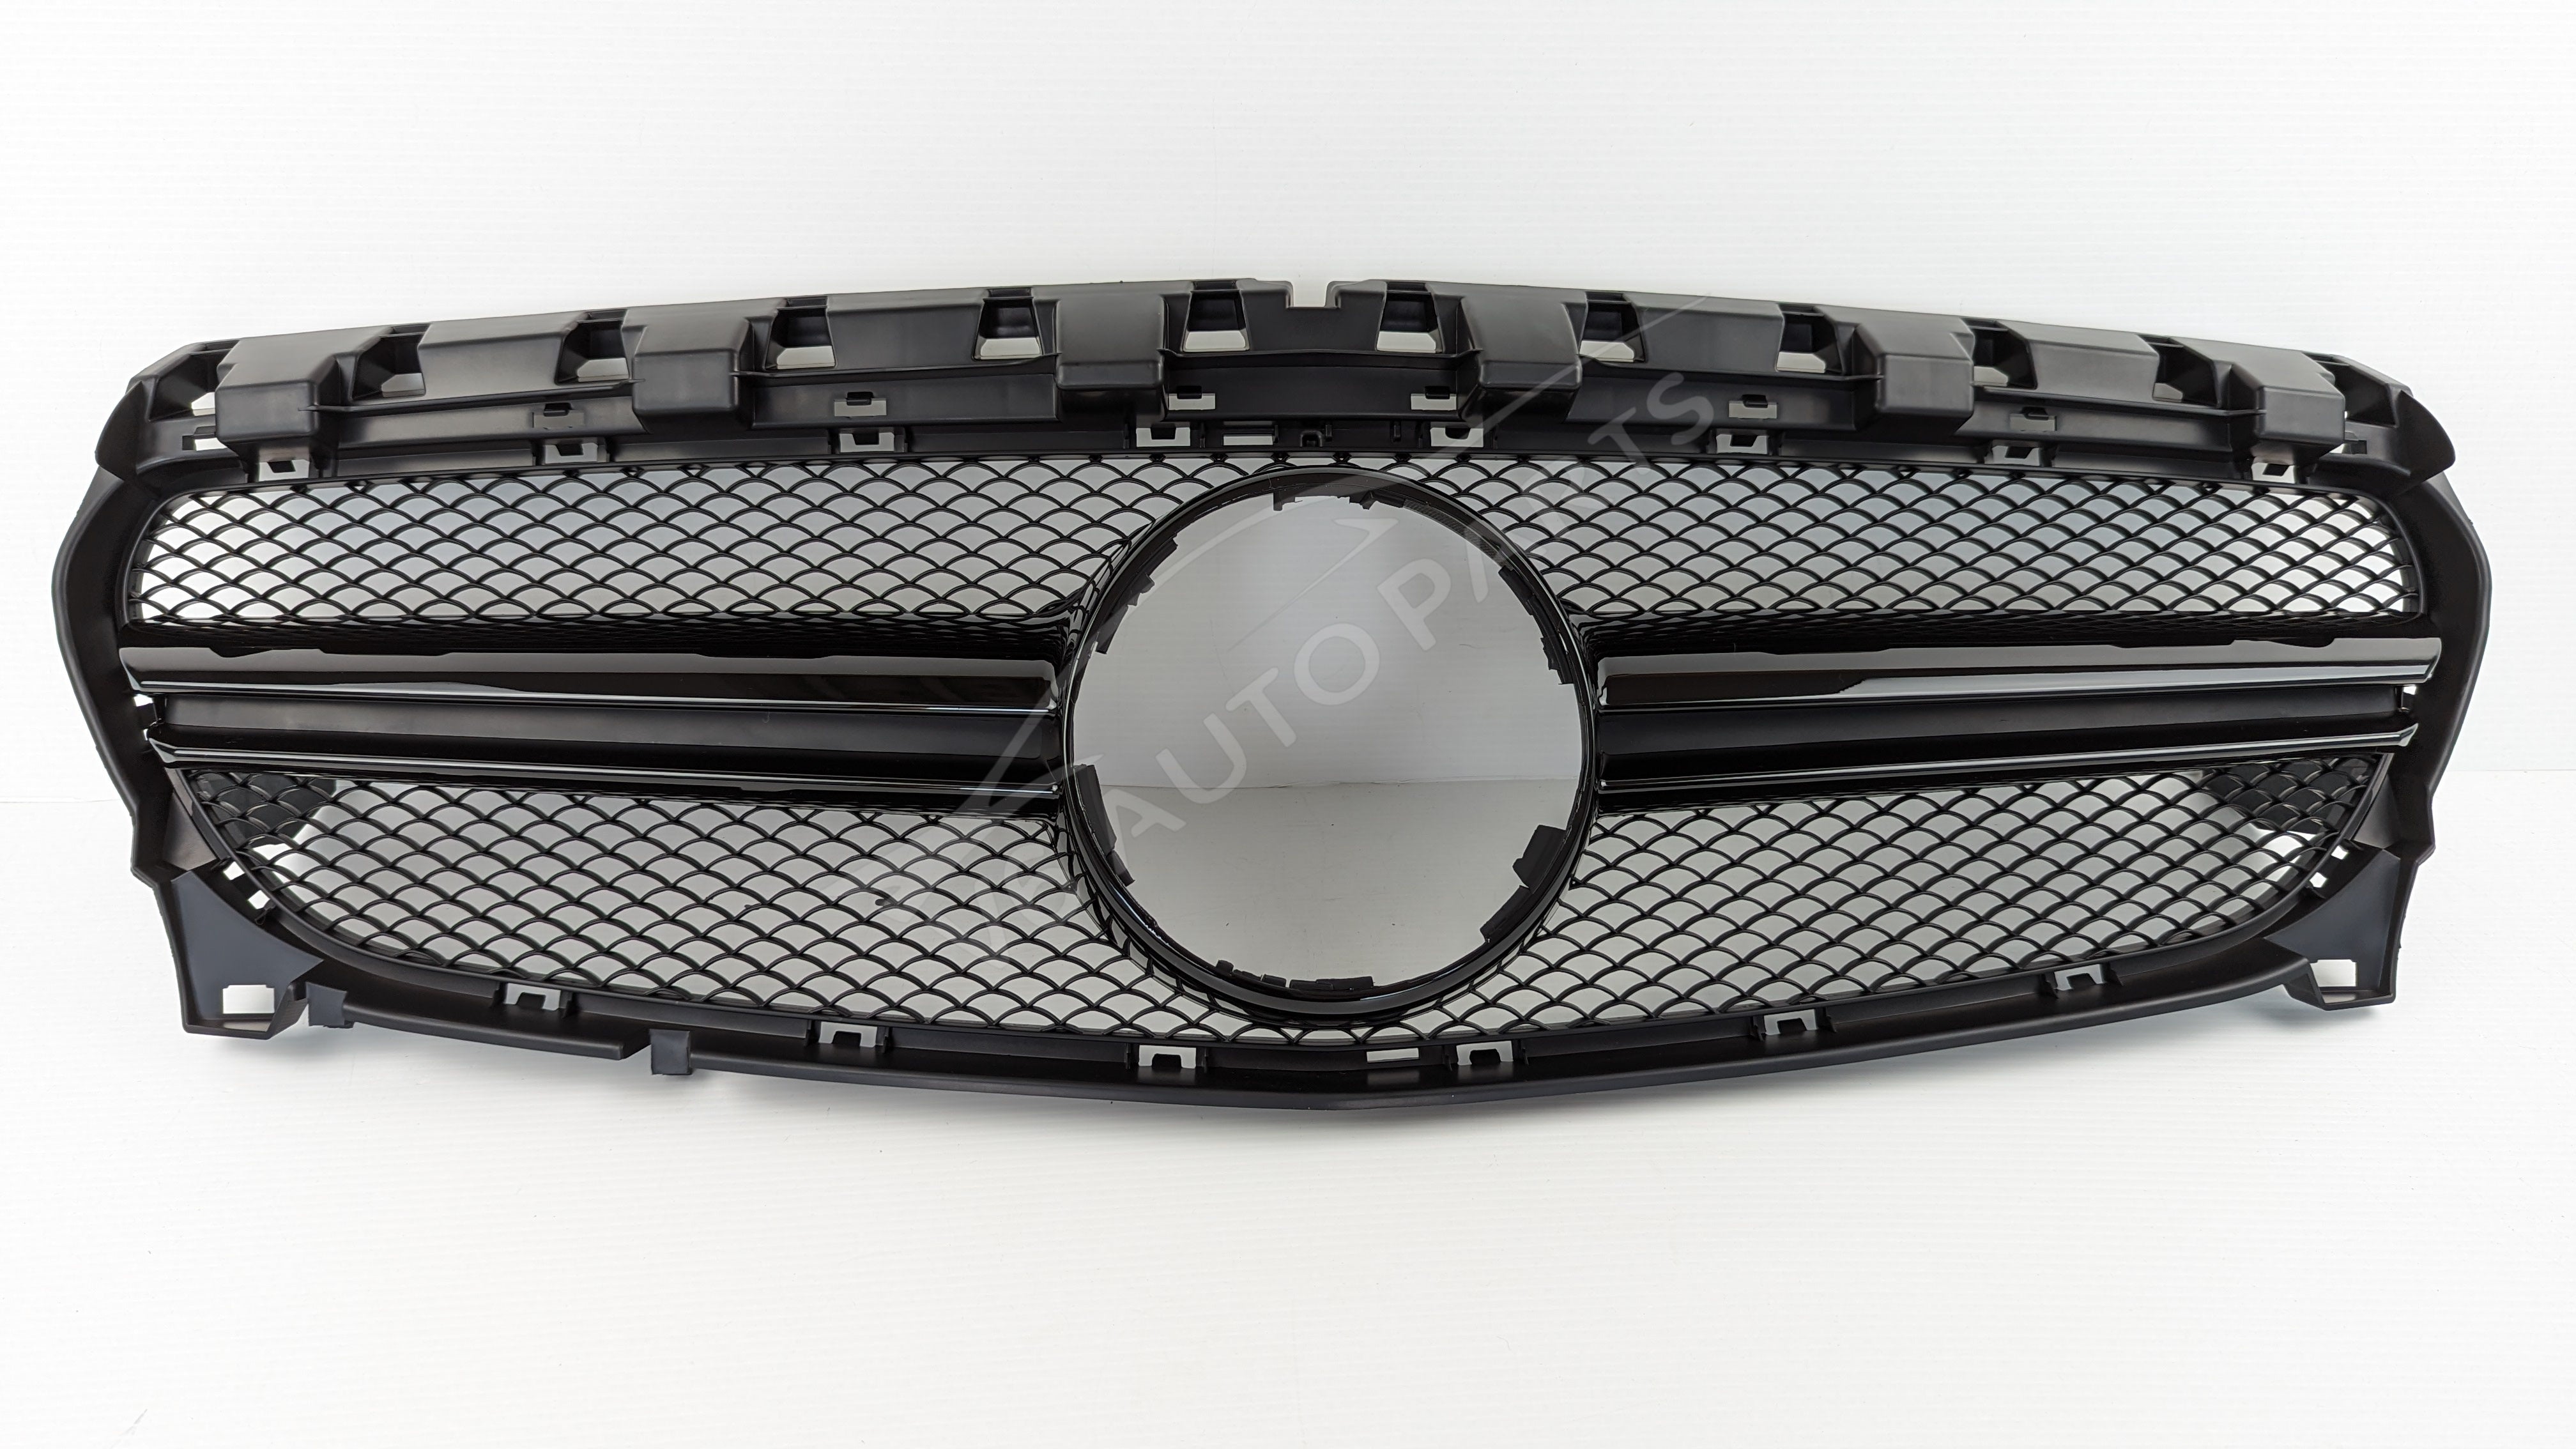 For Mercedes CLA-Class C117 180d CLA200 Front Bumper Grille 2017-2019 AMG Style